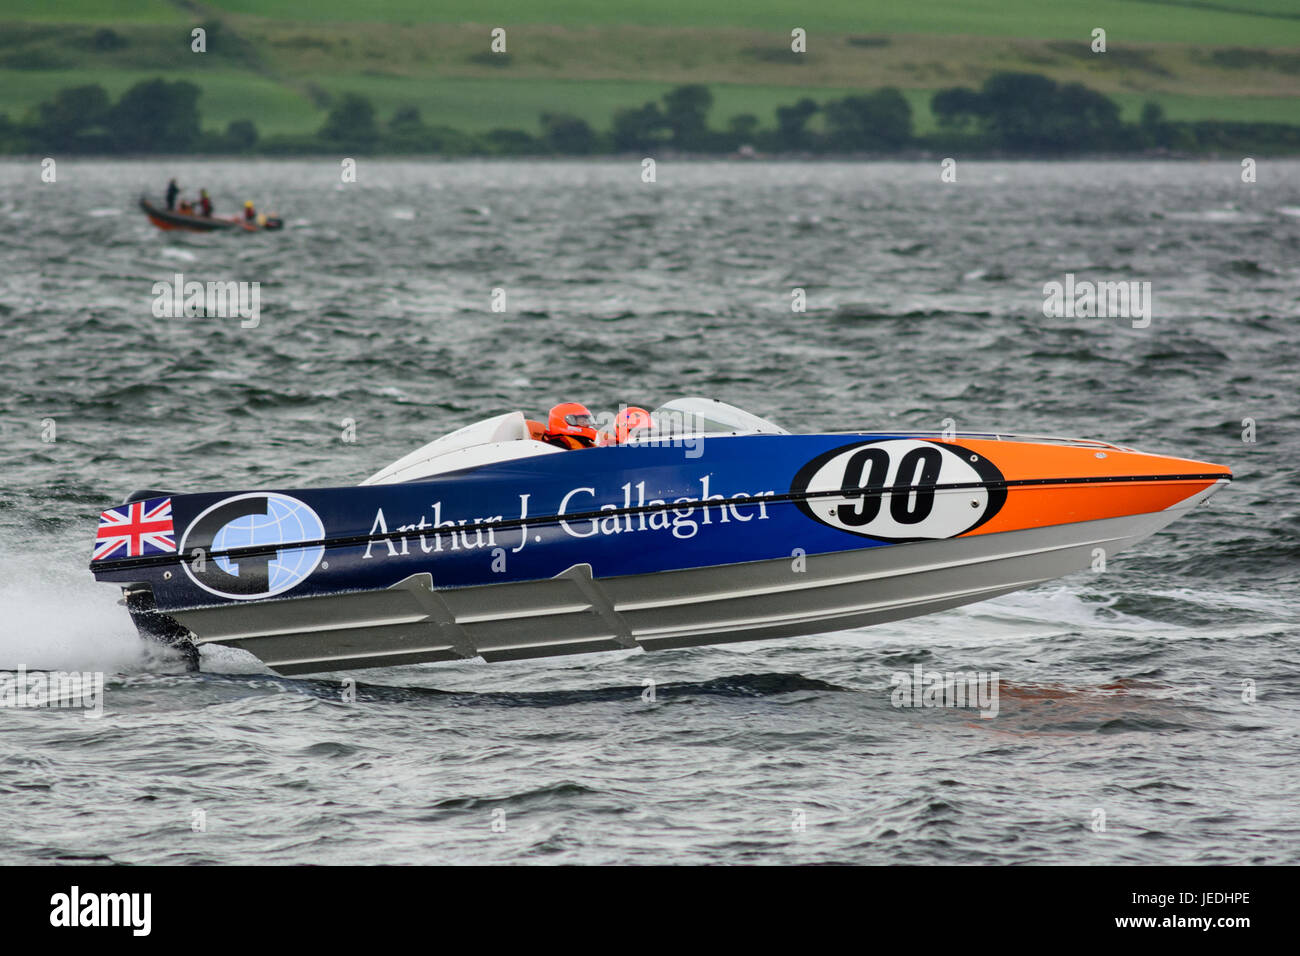 P1 Superstock Powerboat Racing from the Esplanade, Greenock, Scotland, 24 June 2017. Boat 90, Arthur J Gallagher, driven by Dave Taft and navigated by Andy Cousins. Stock Photo